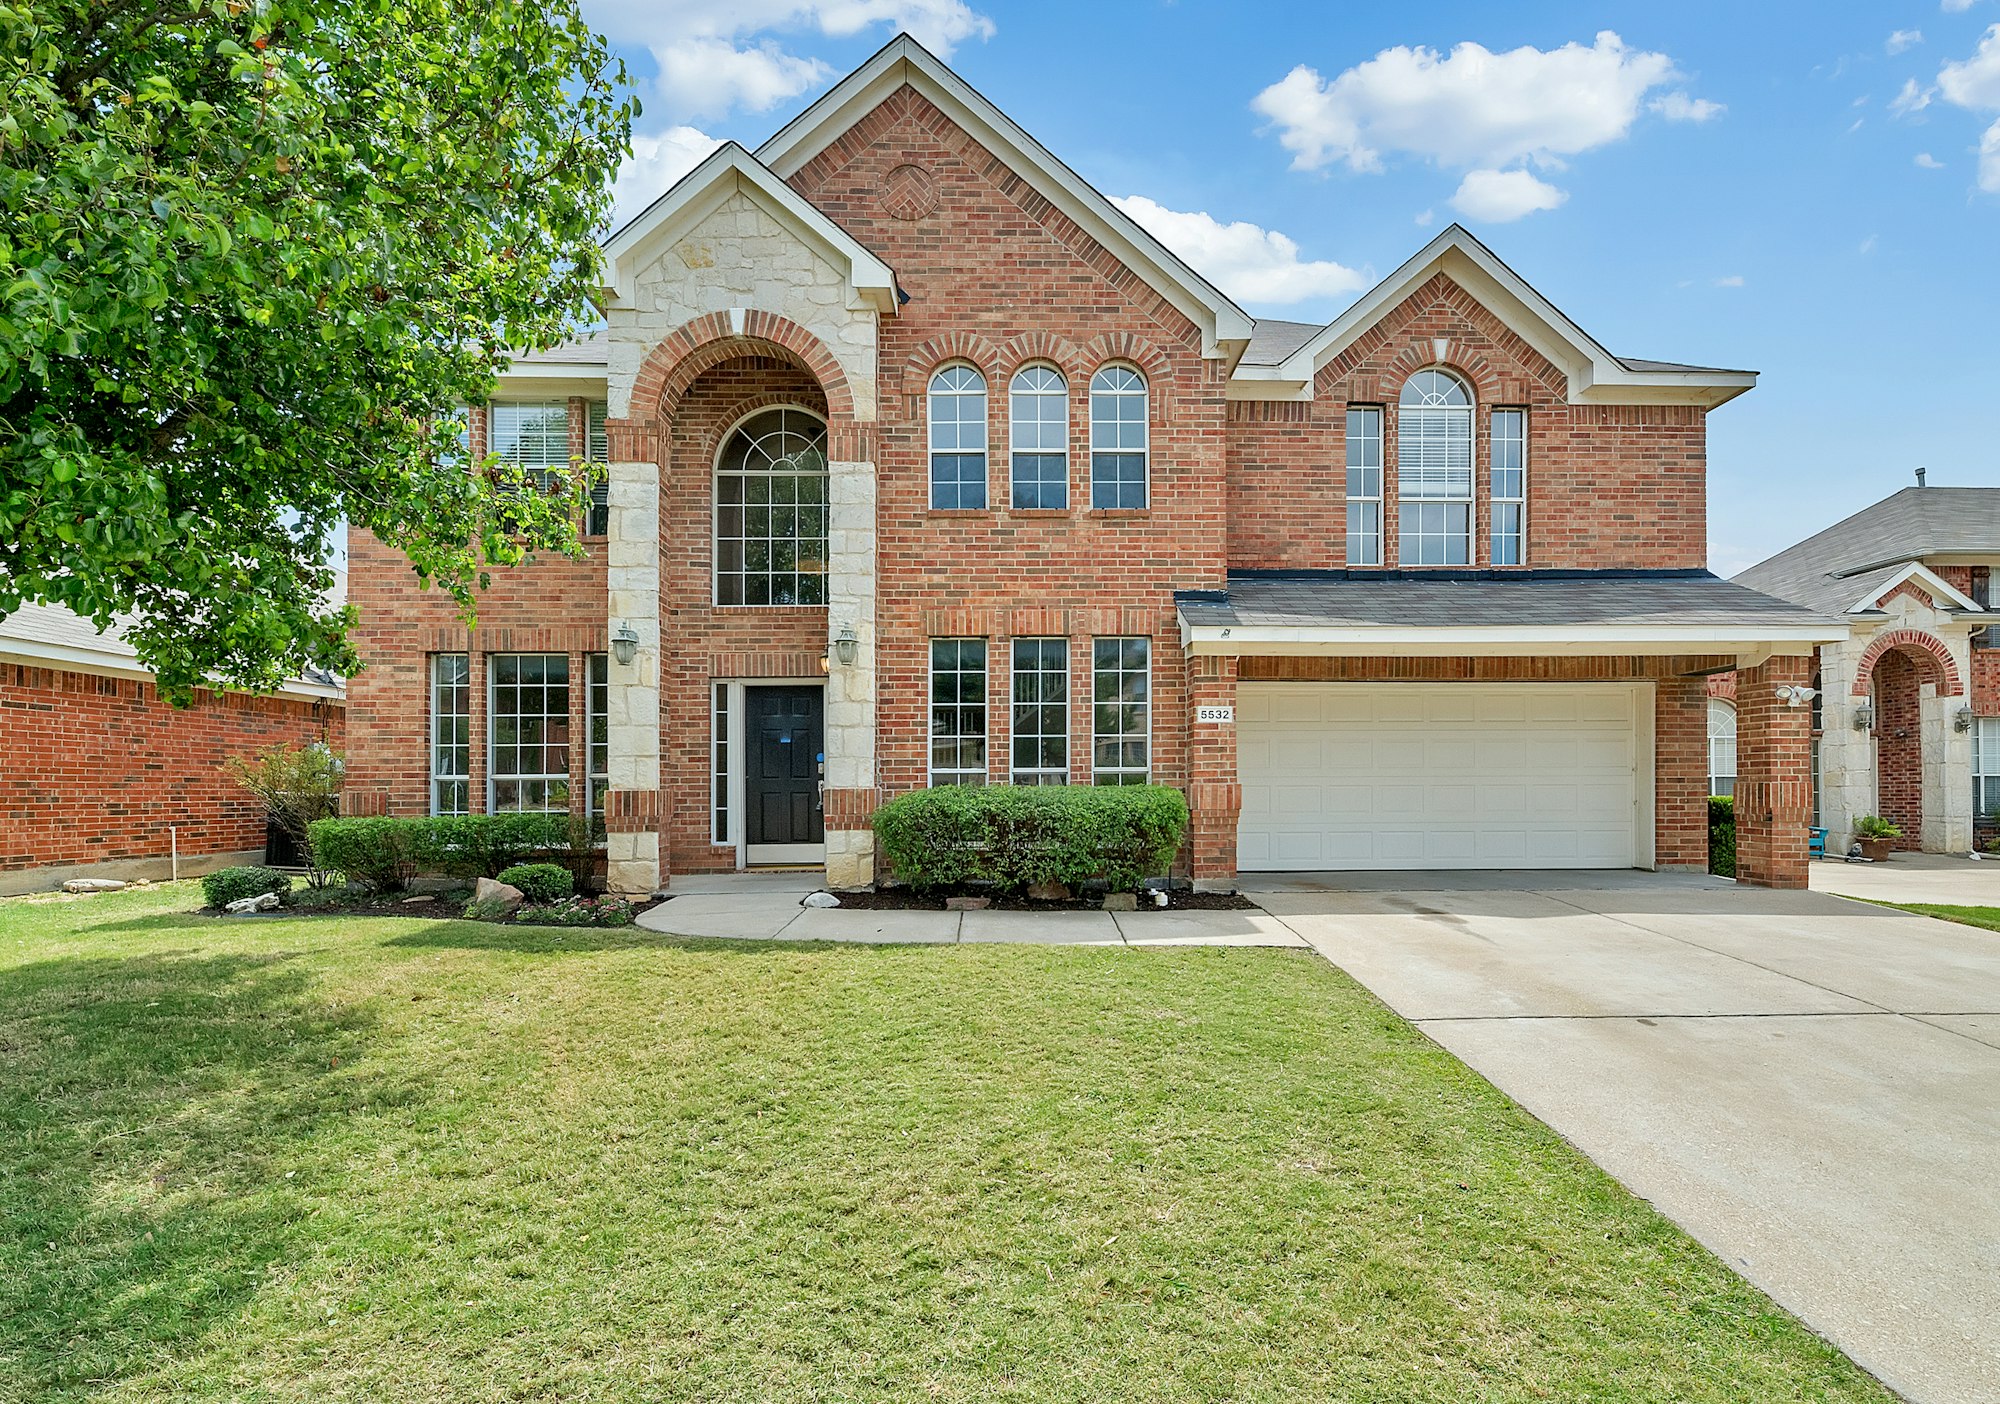 Photo 1 of 33 - 5532 Monthaven Dr, Fort Worth, TX 76137